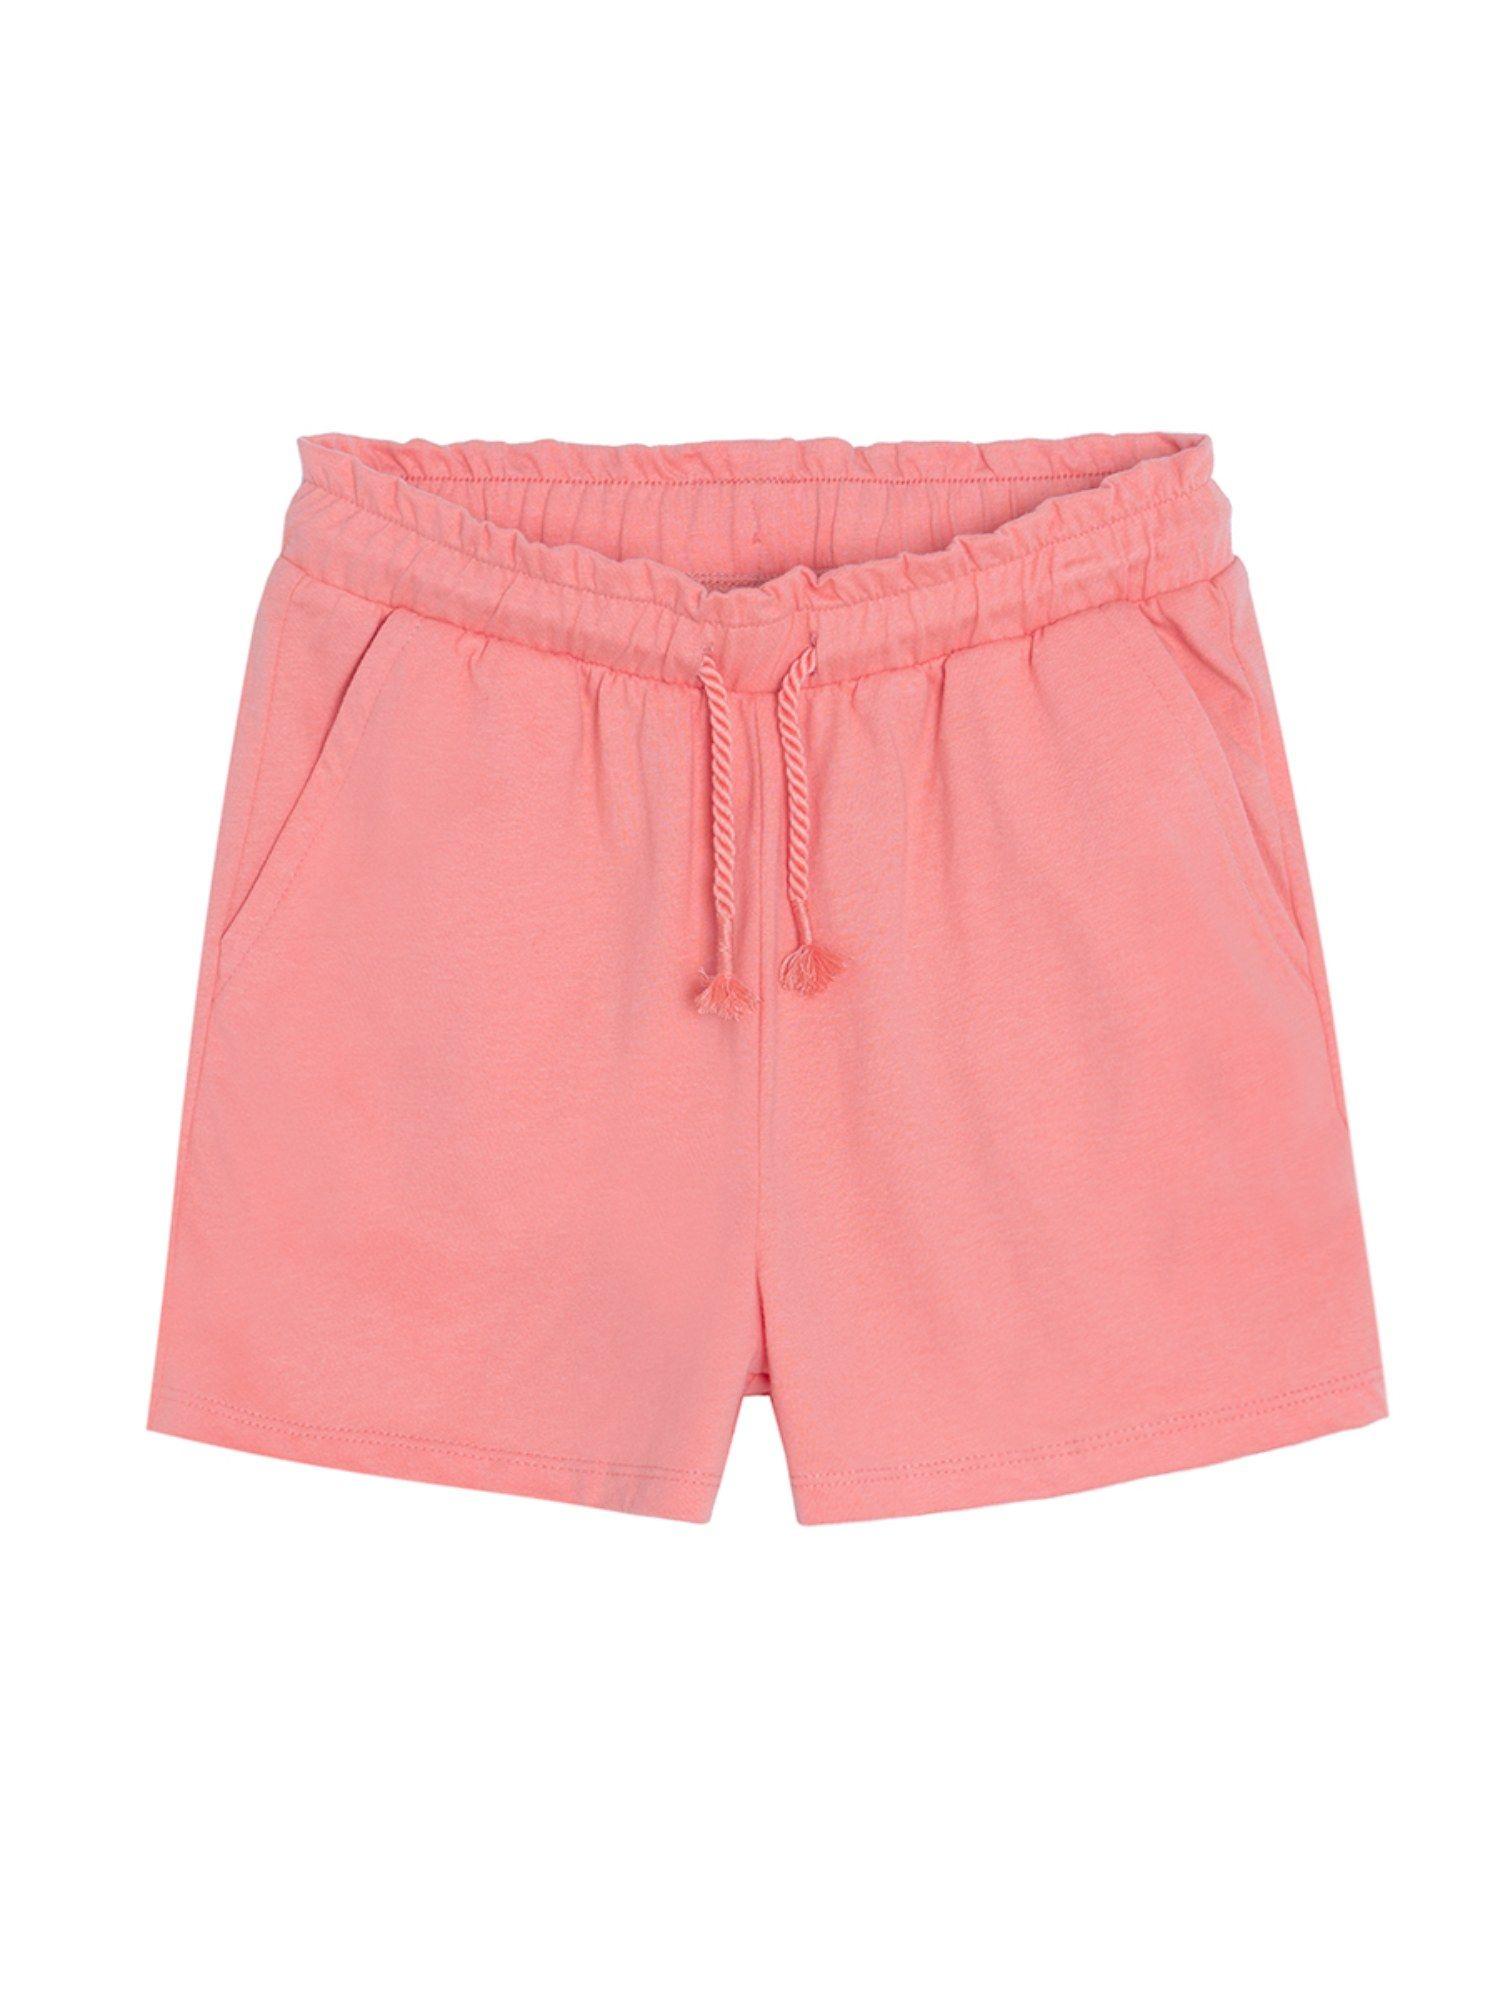 smyk-girls-coral-solid-shorts